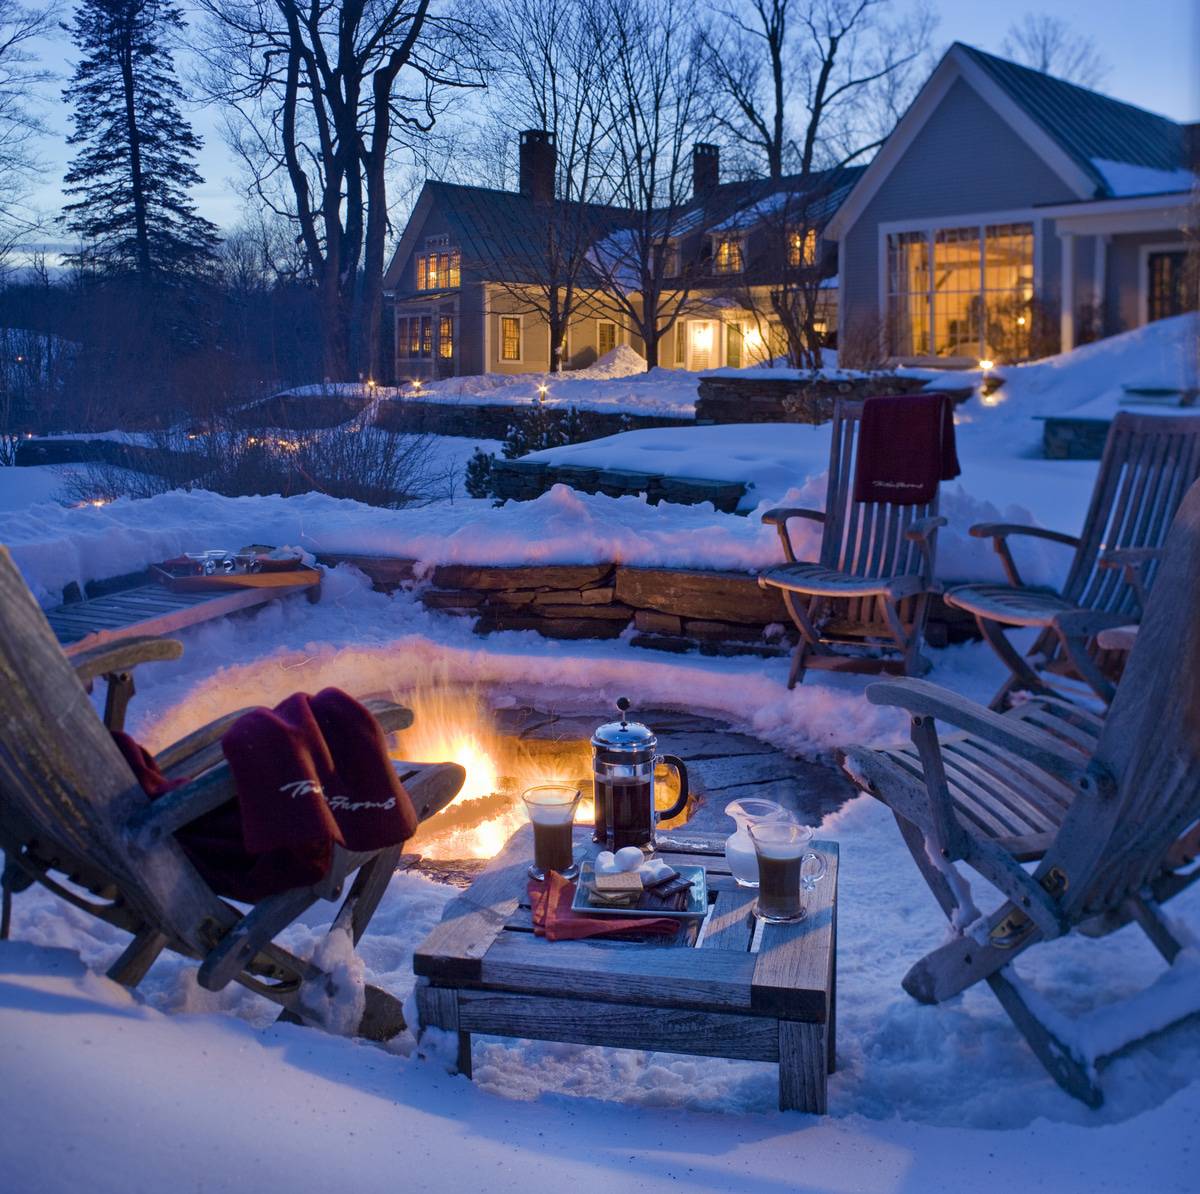 Twin Farms - Winter Outdoor Fire Pit with Smores